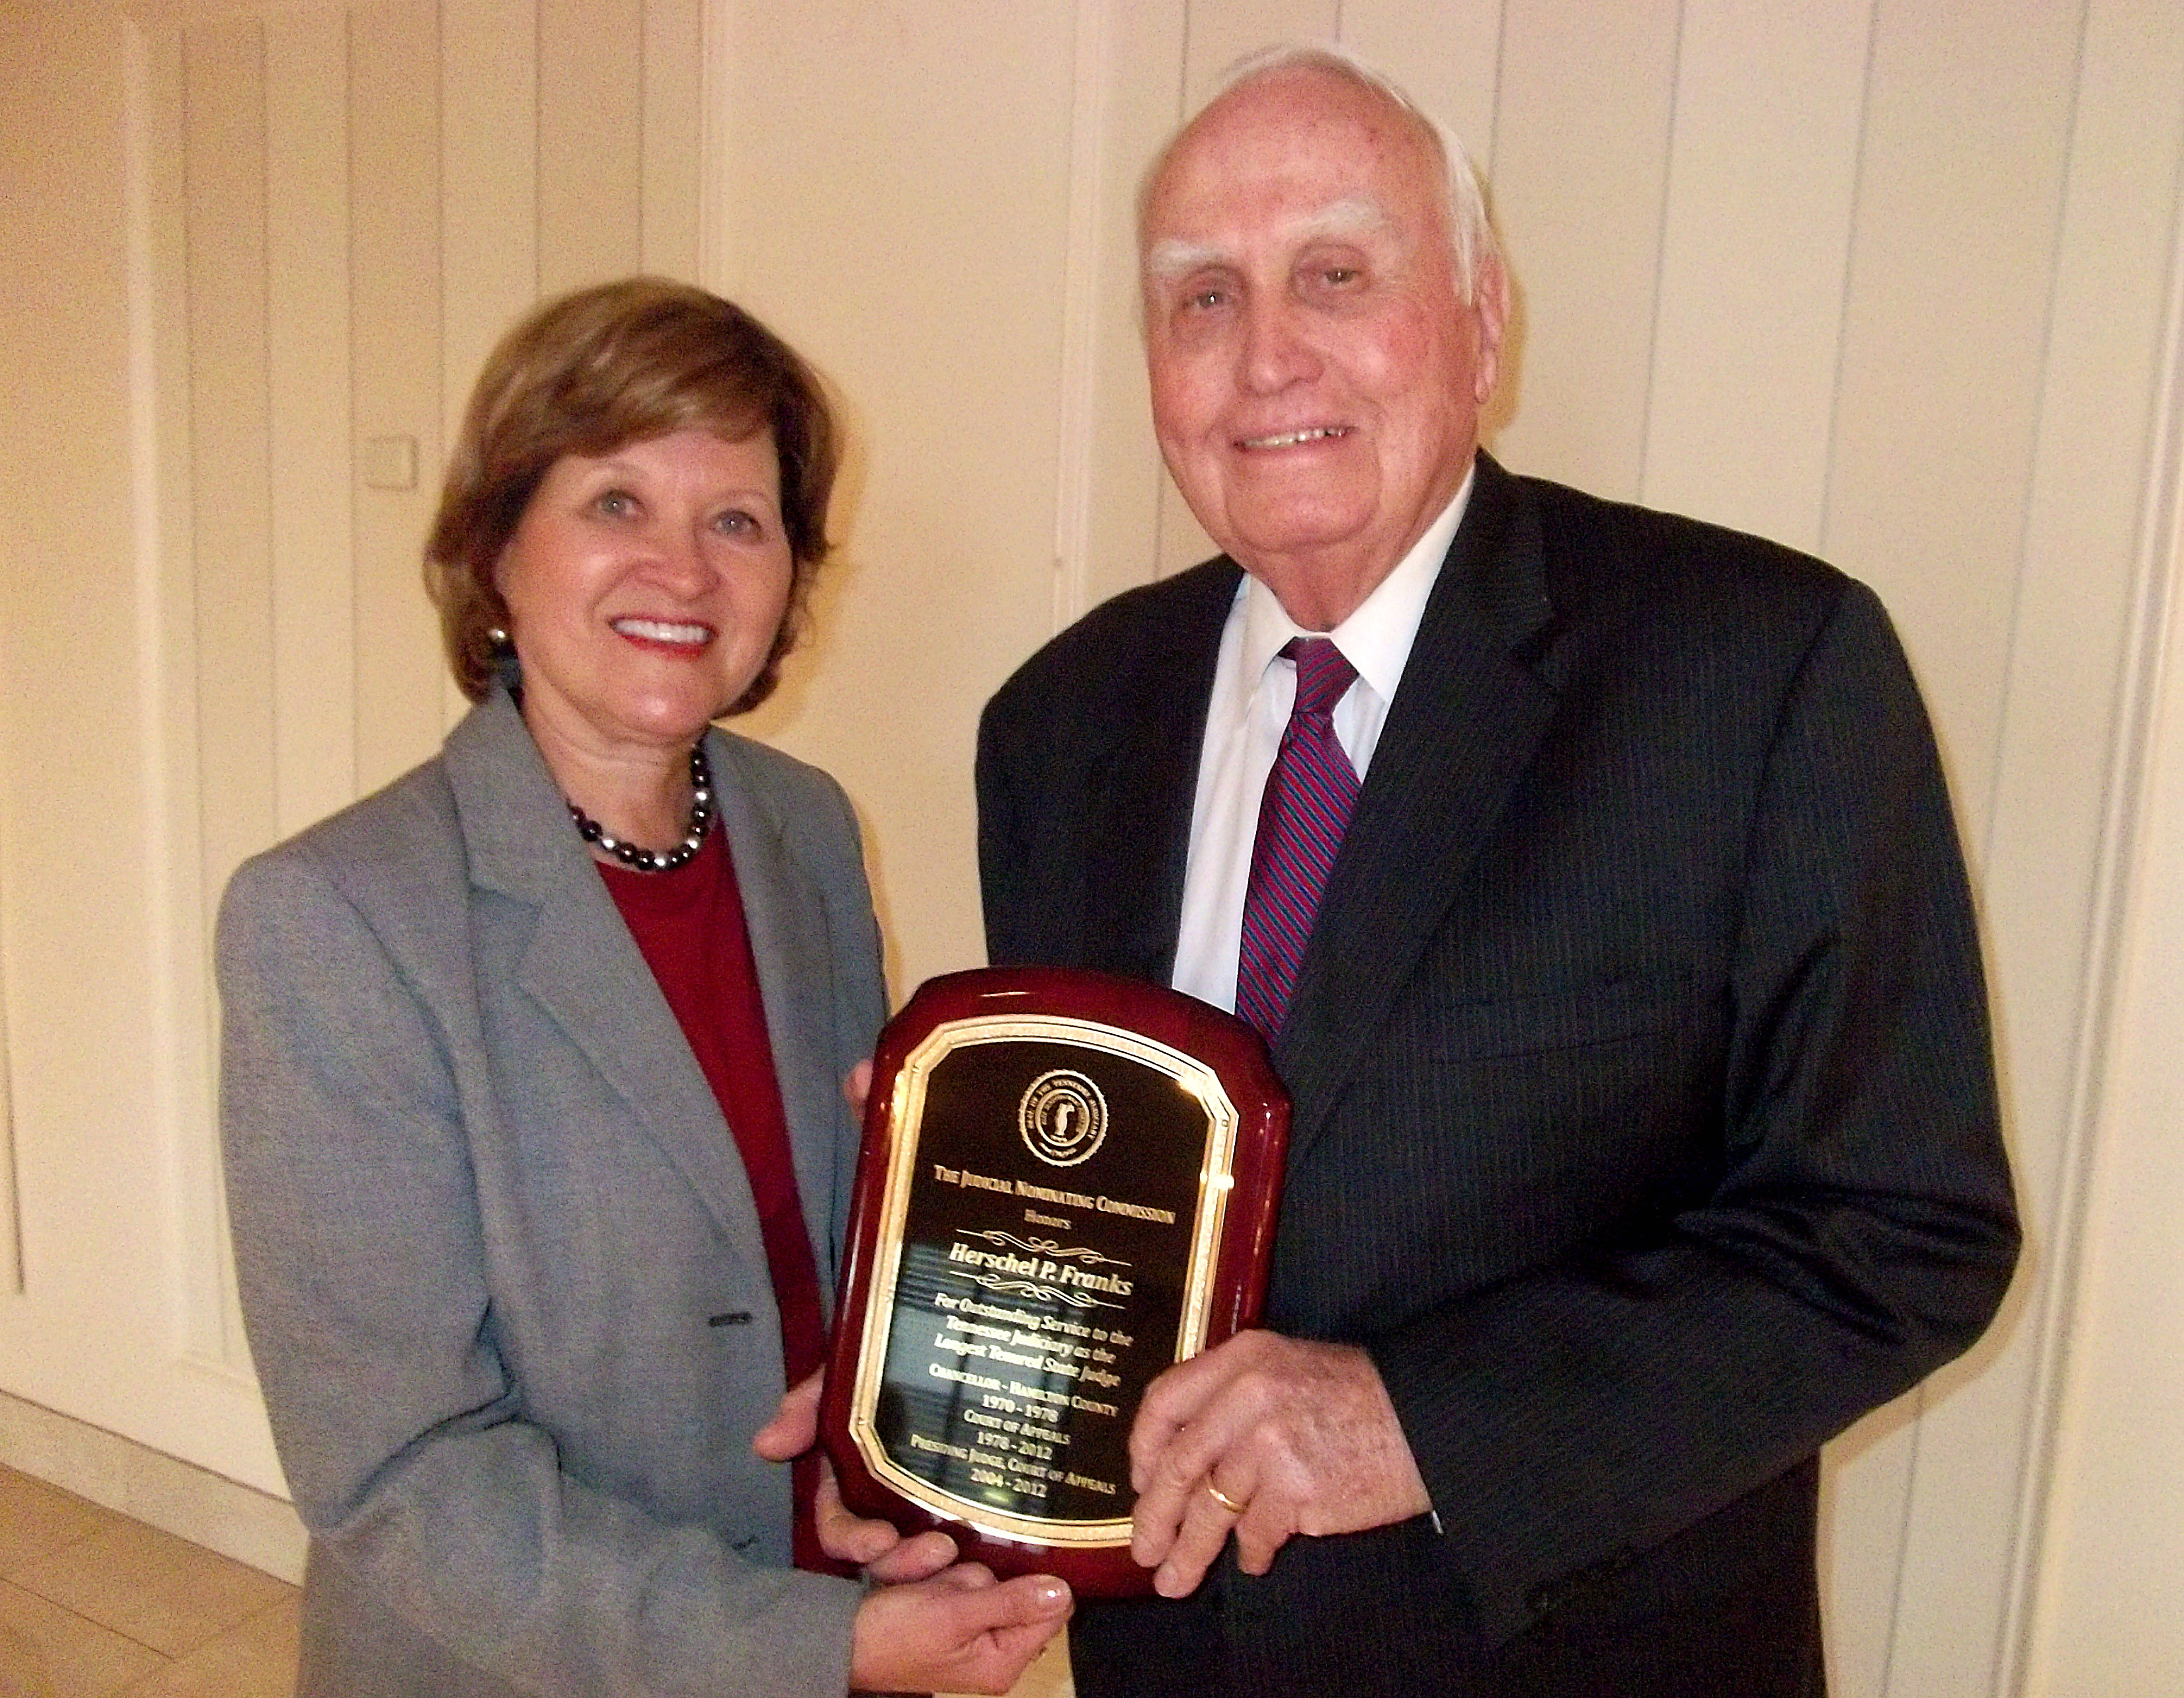 Supreme Court Justice Sharon G. Lee presents Judge Herschel P. Franks with a plaque commemorating his service as he prepares to retire at the end of the year. 